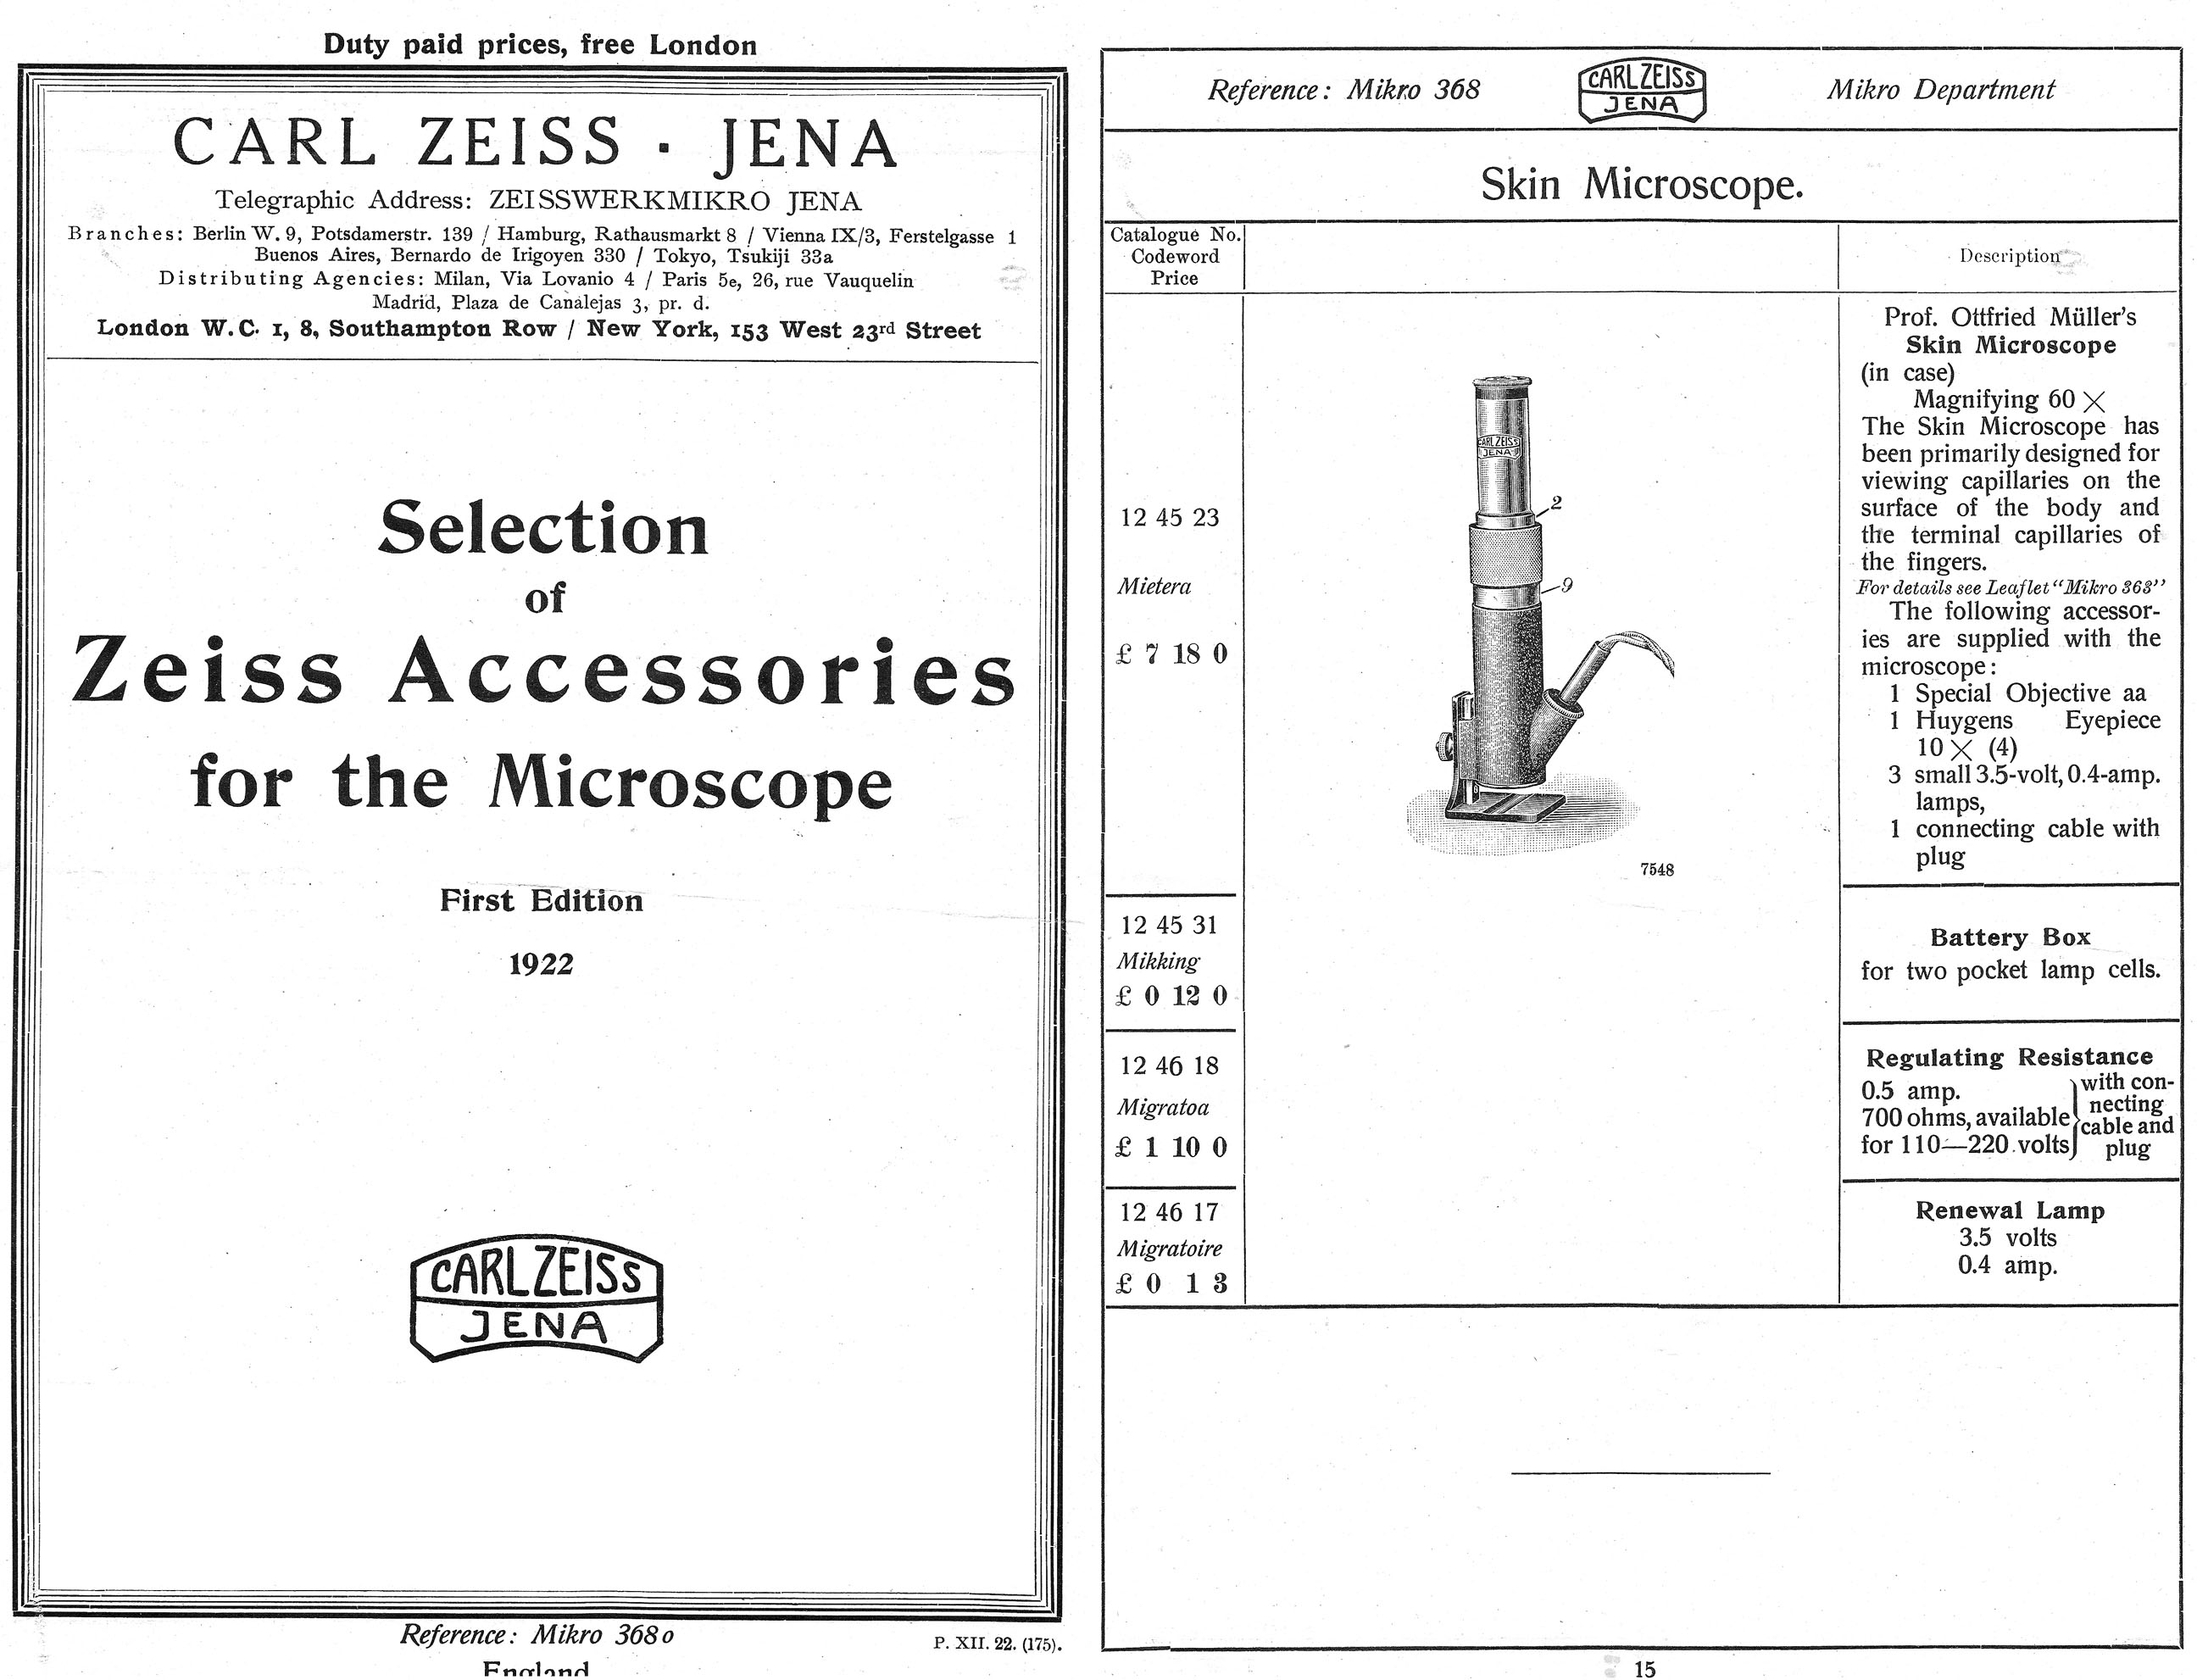 ZEISS 1922 Accessory Catalog entry for  Skin Microscope